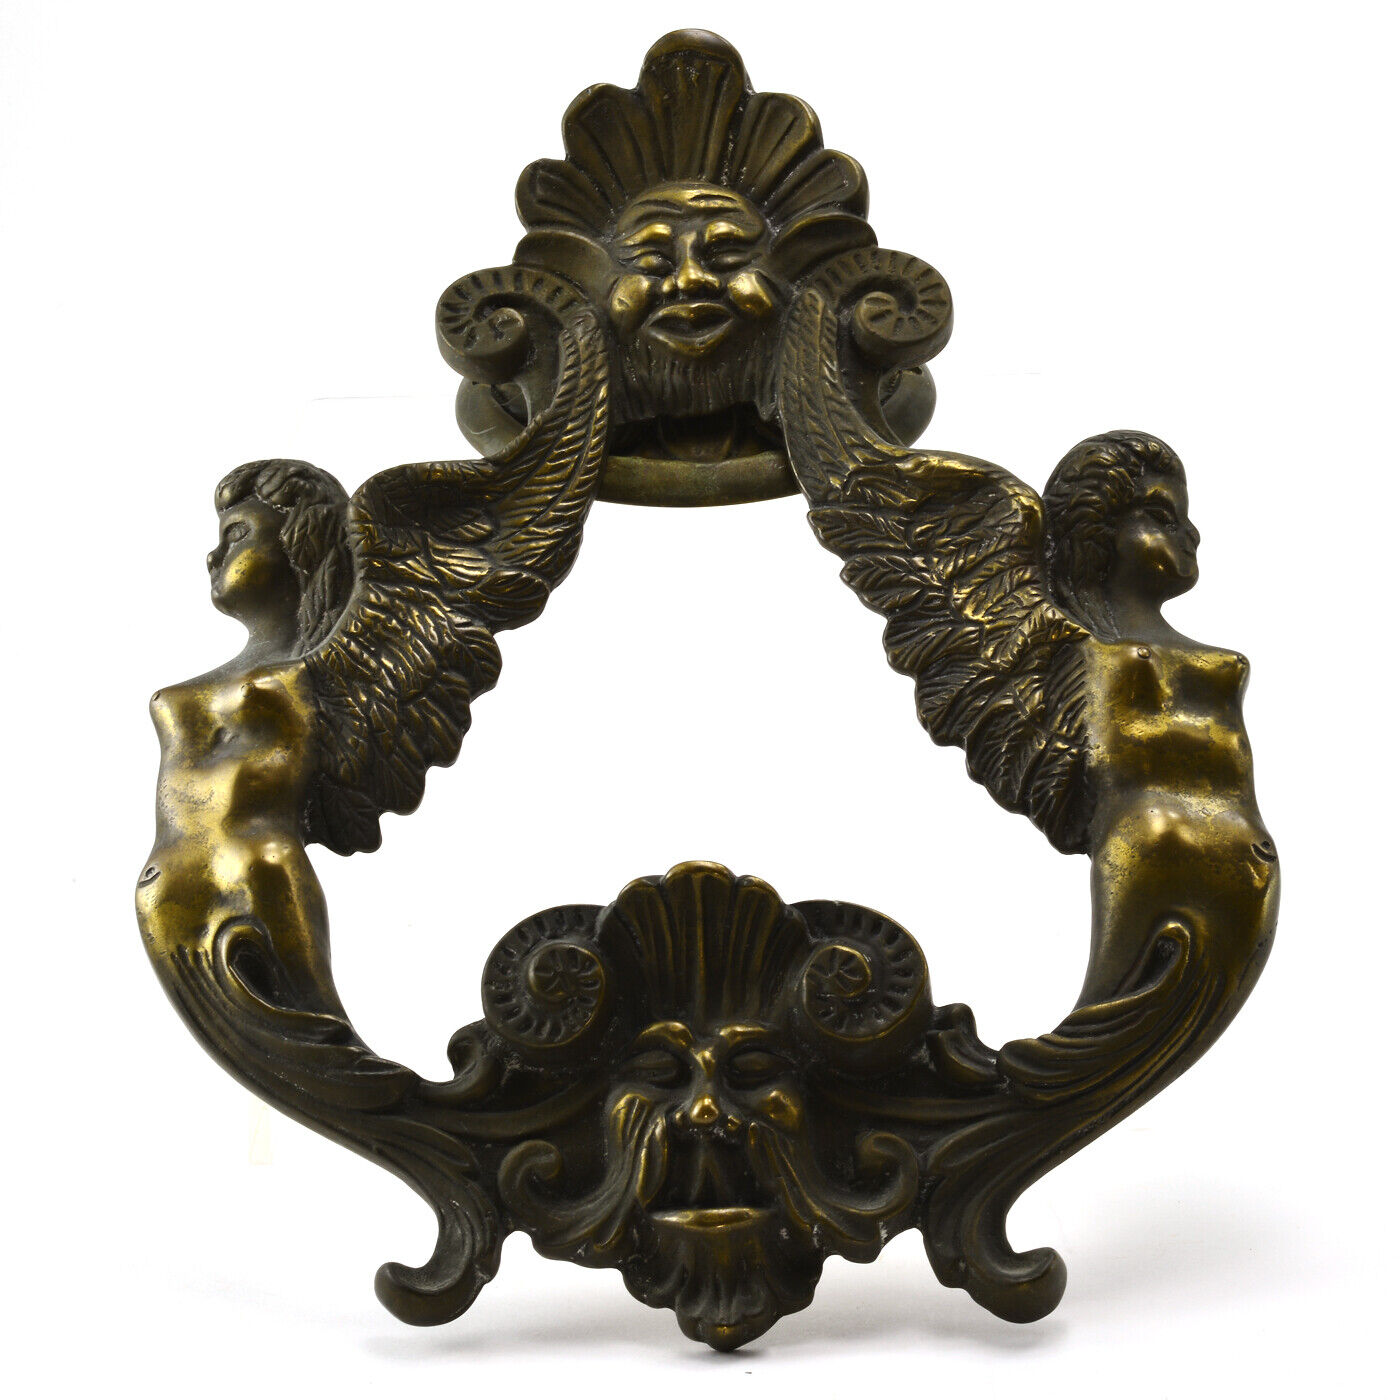 Antique massive brass door knocker with winged figures angles in an Asian motif